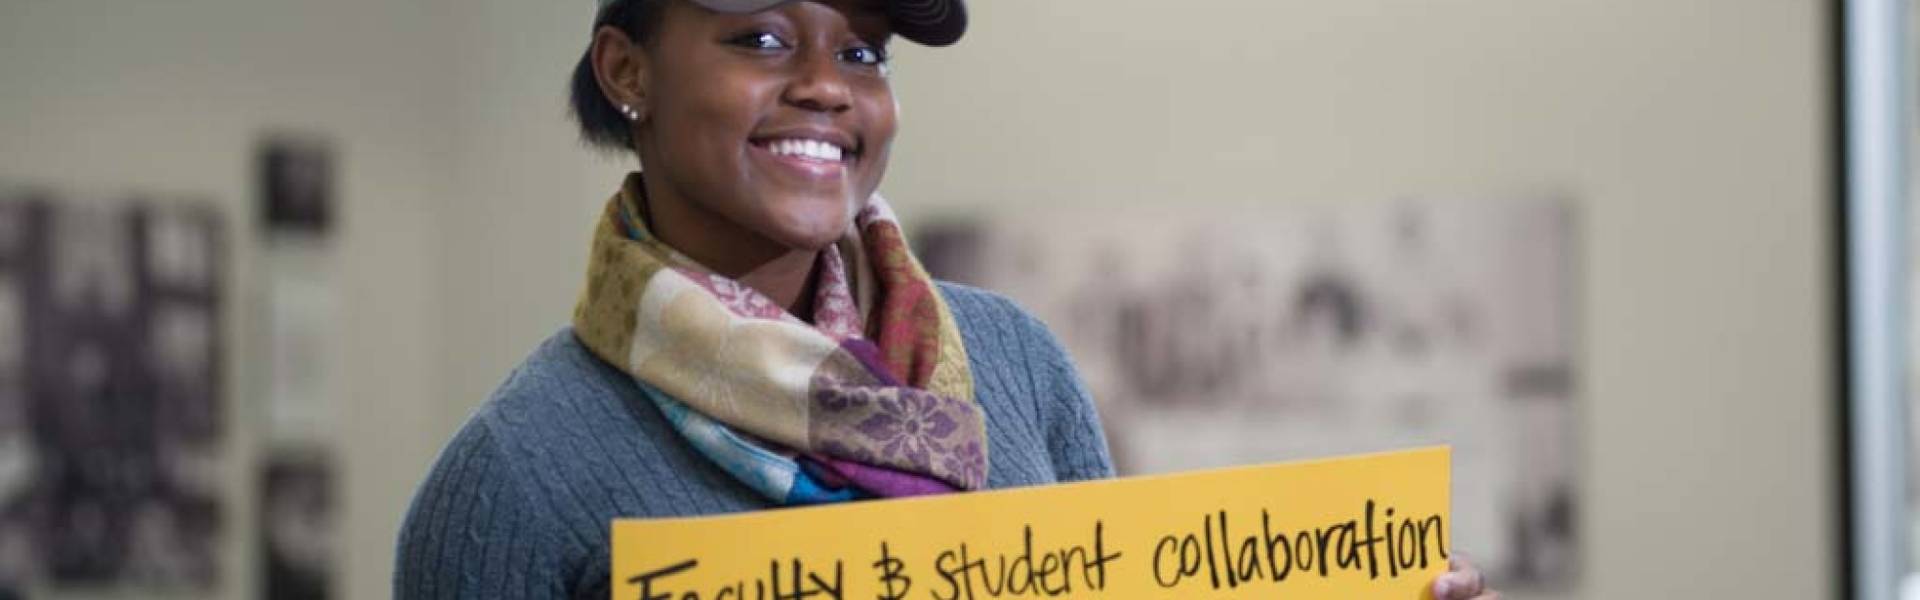 UW-Eau Claire student holds sign that reads “Faculty and student collaboration - you made it possible."